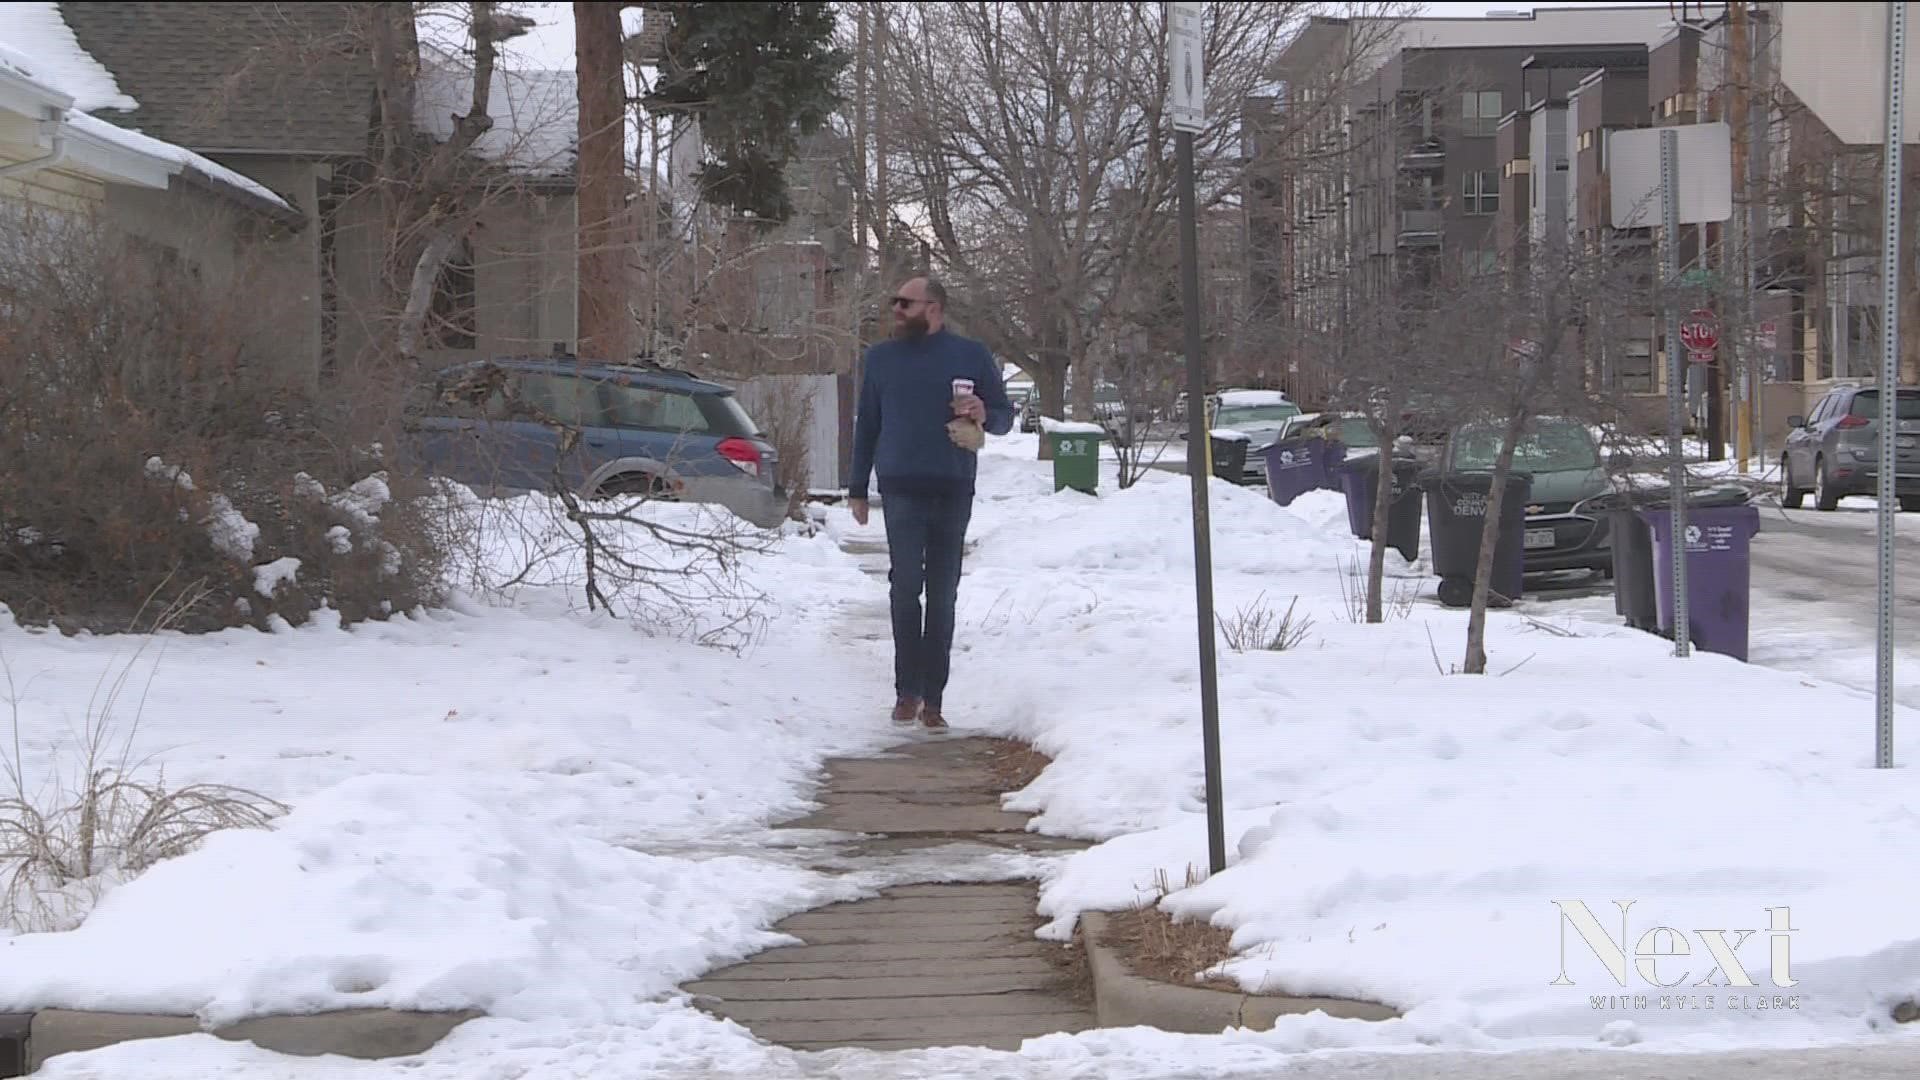 Denver property owners have 24 hours after a storm to shovel. Neighbors can call in to 311 to report icy walkways - with a pretty high success rate.